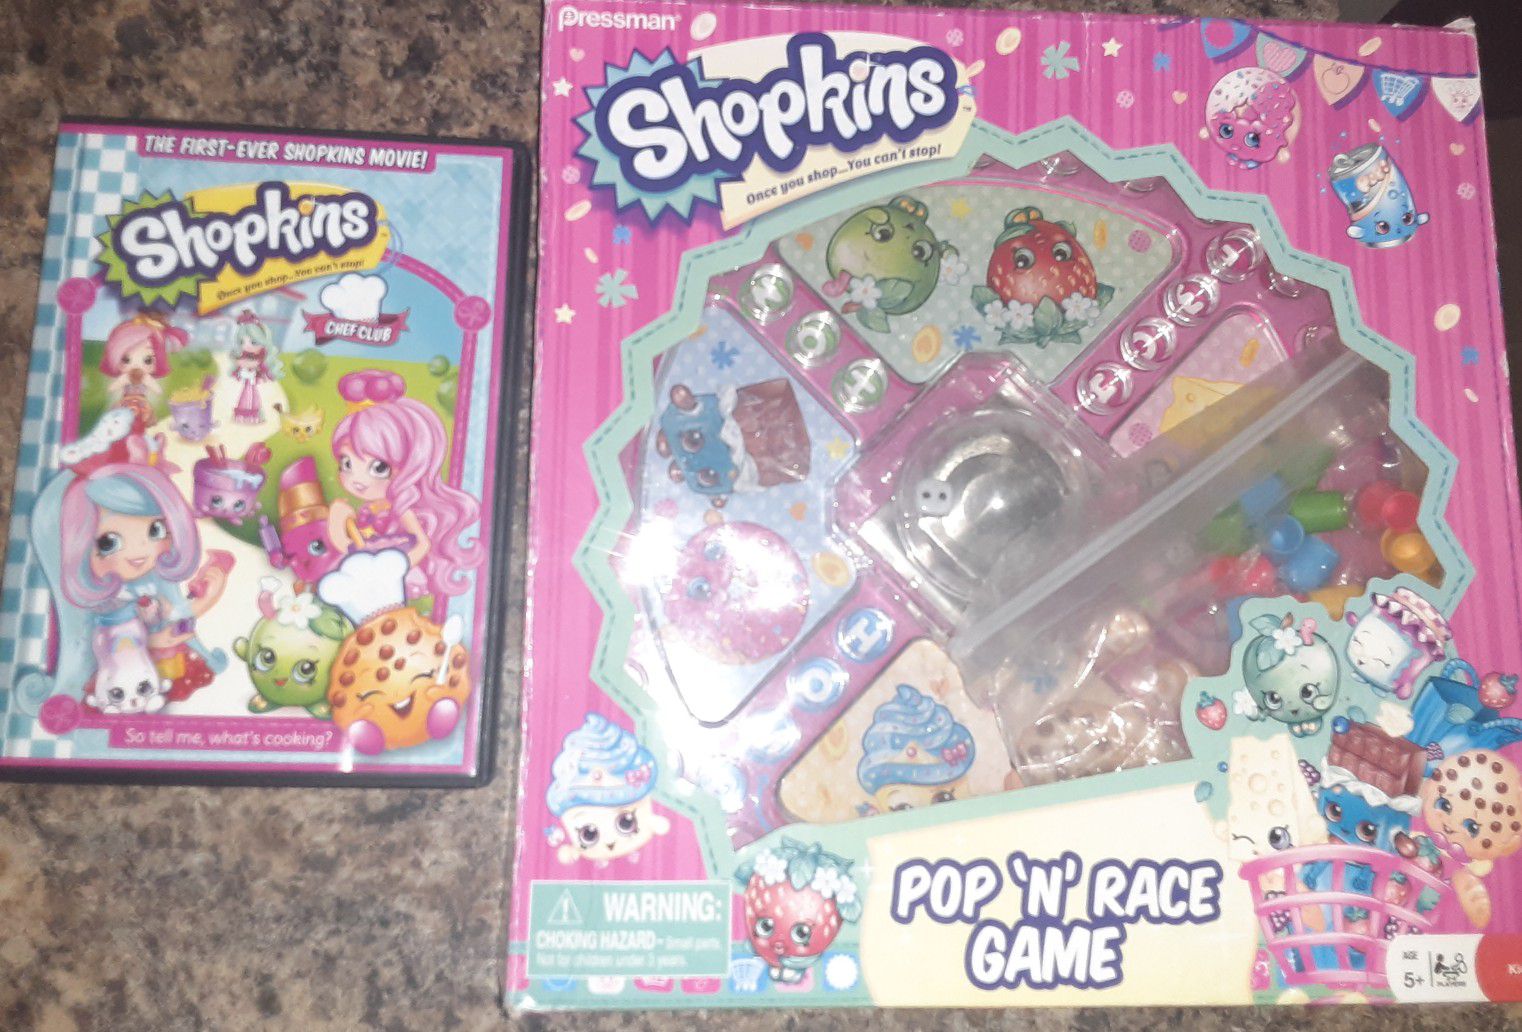 Shopkins dvd and pop n race game